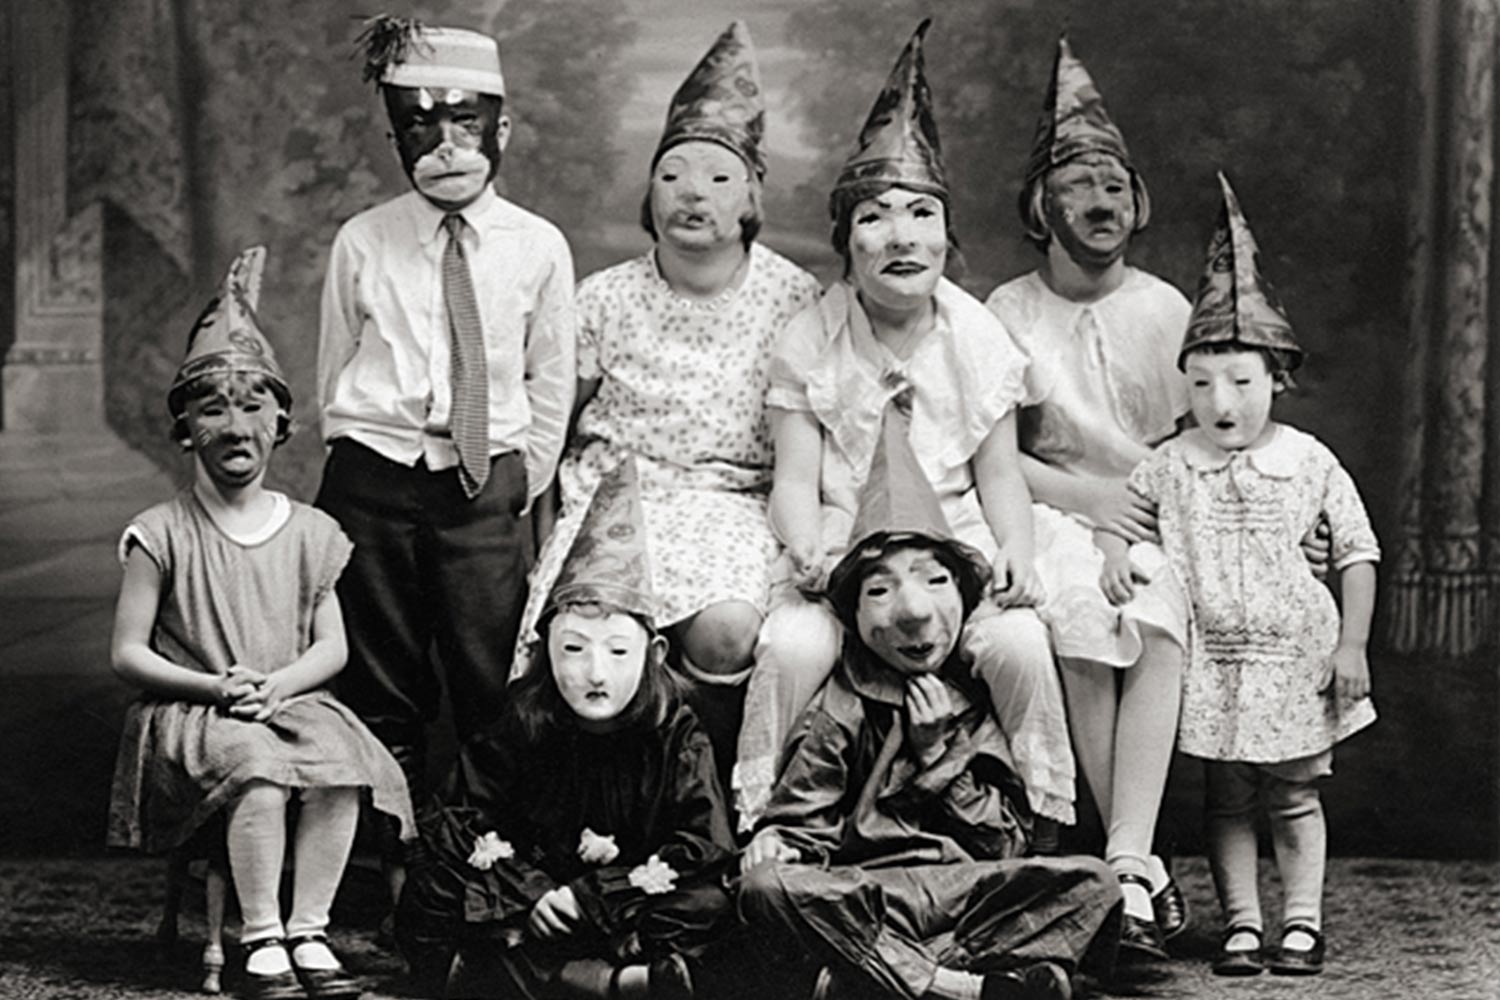 B&W photograph of a group of children wearing masks and pointed hats